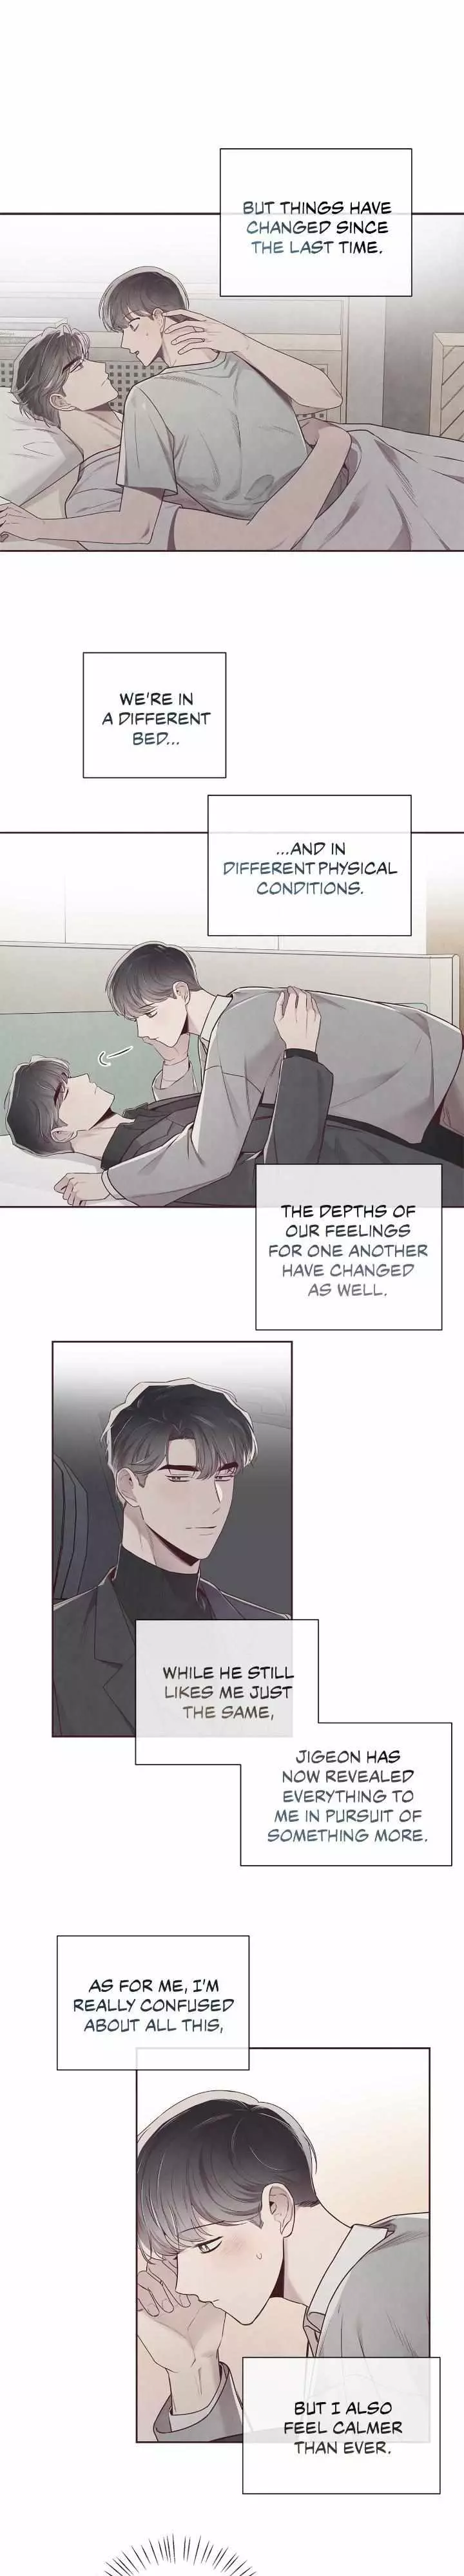 A Link Between Relationships - 60 page 4-7bad15a3